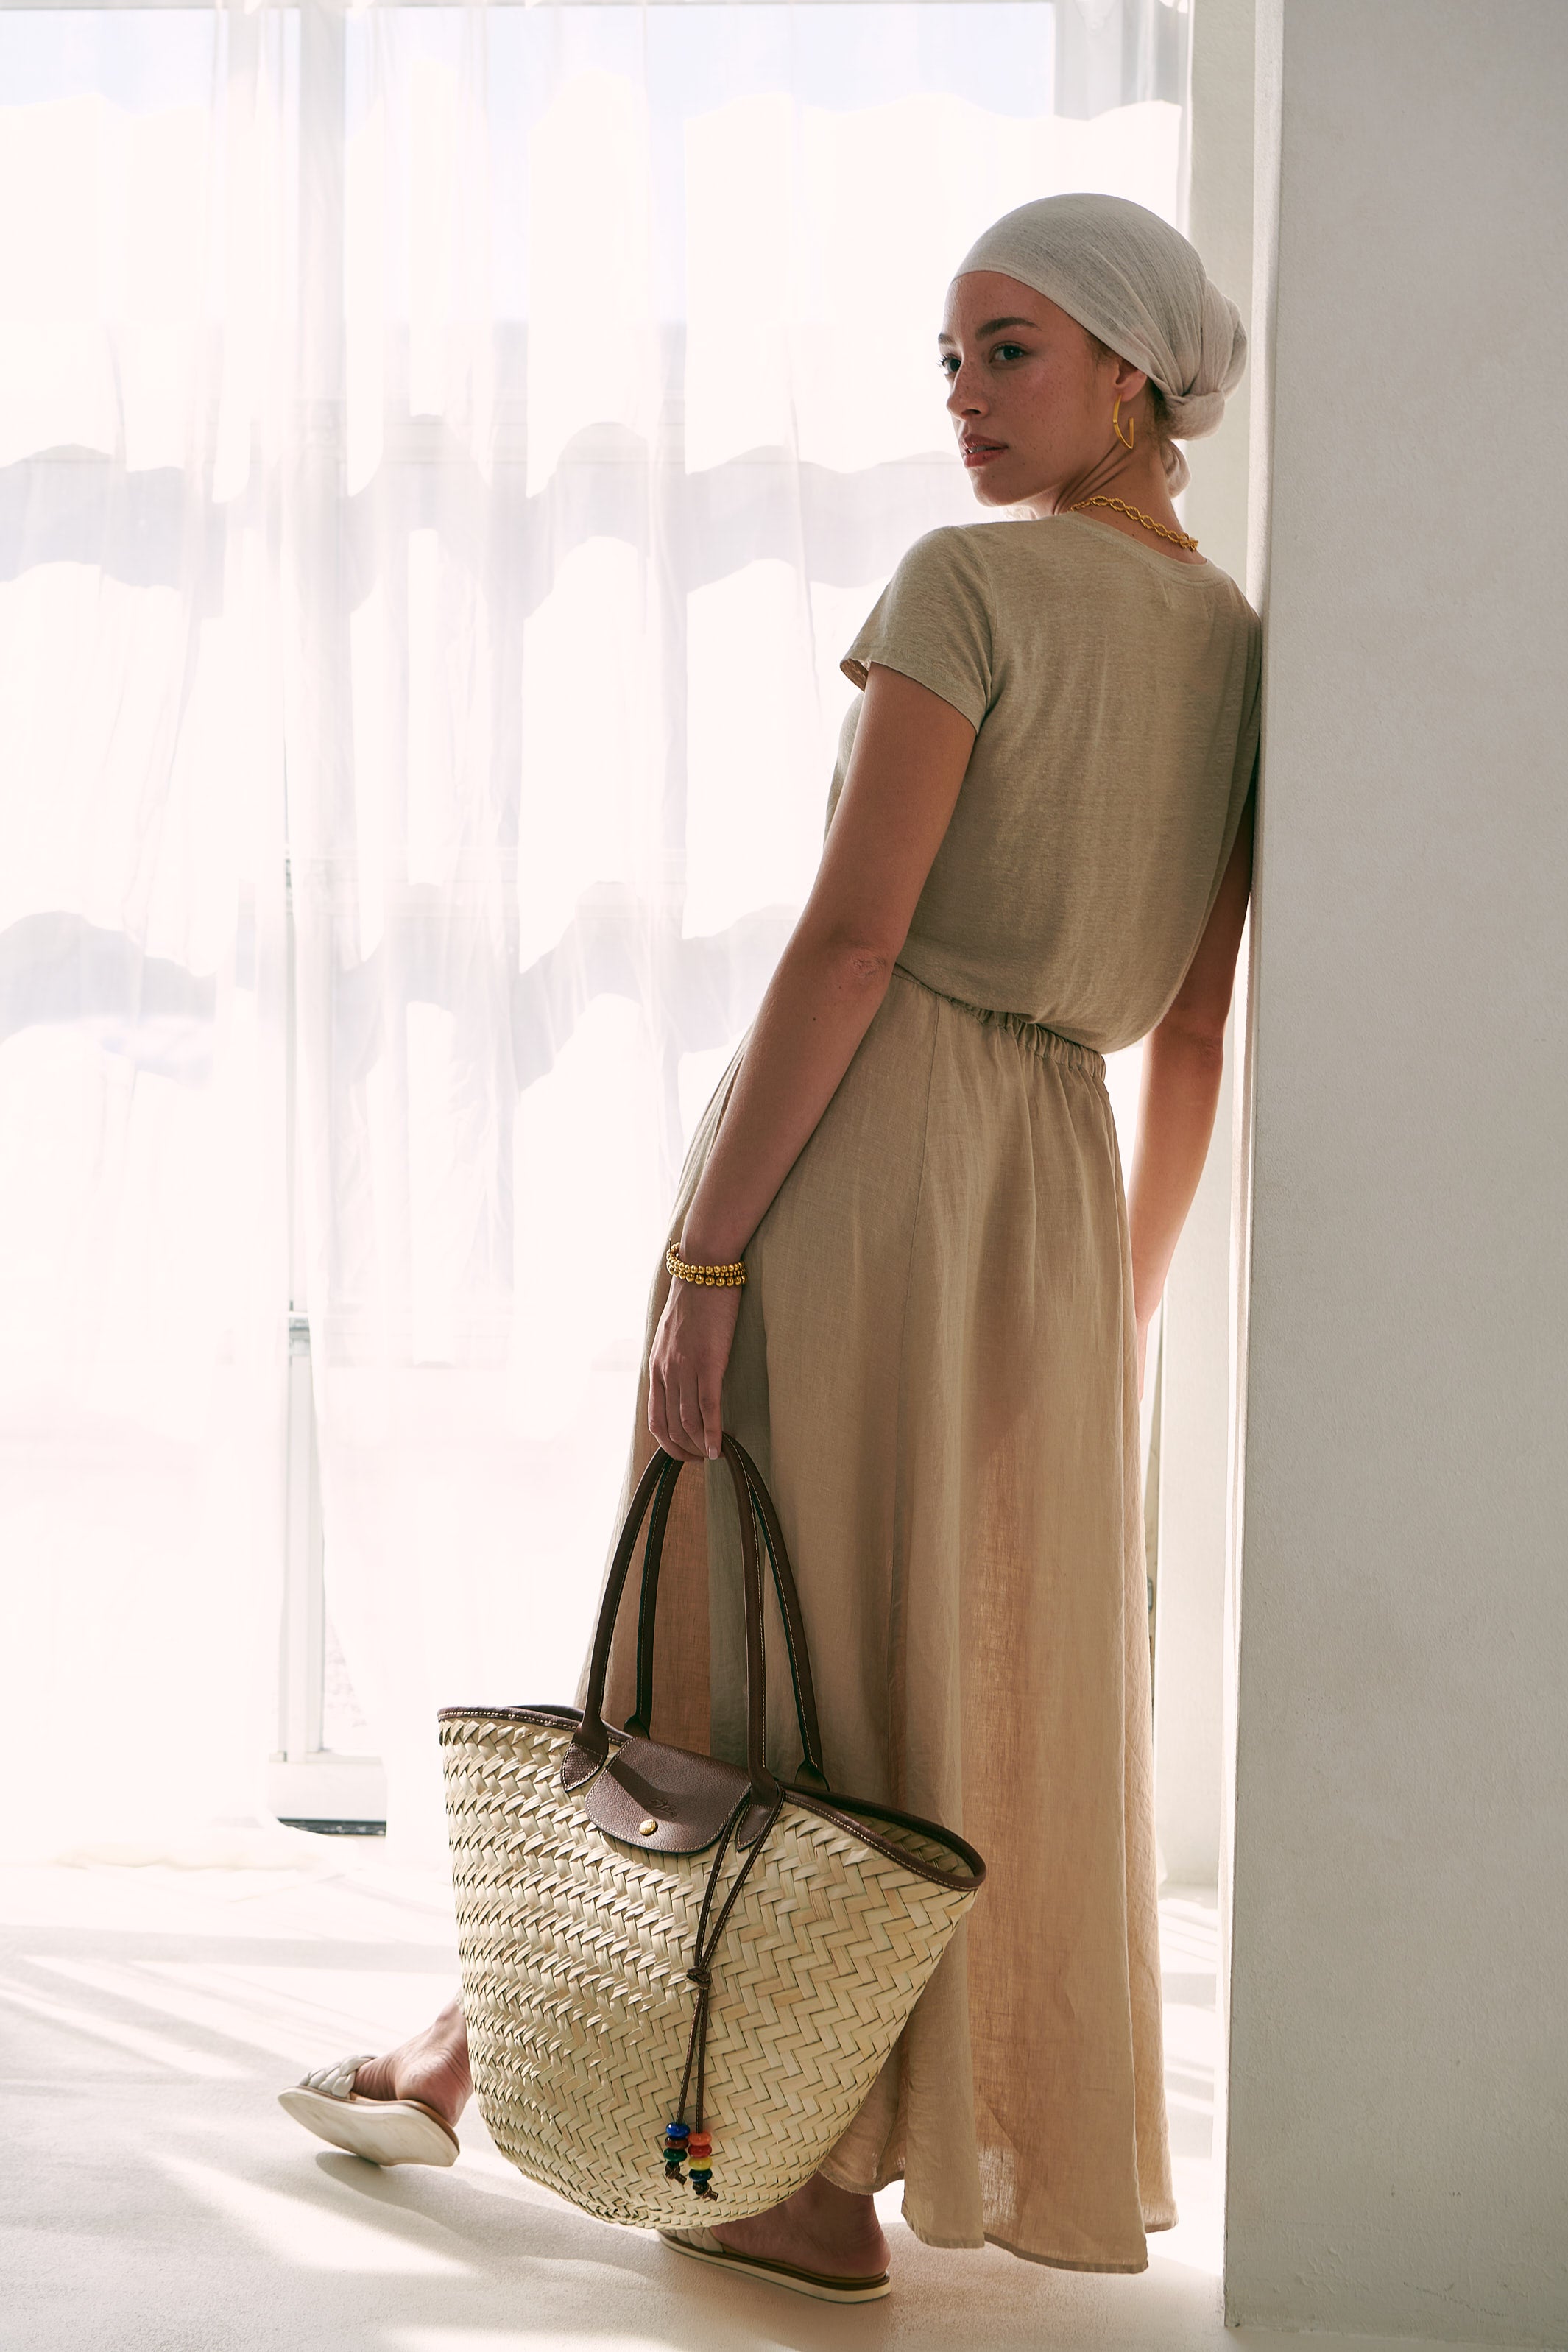 The Casey Linen Knit Crewneck Top and Bailey Woven Linen Drawstring Skirt by Velvet, paired with a longchamp woven bag